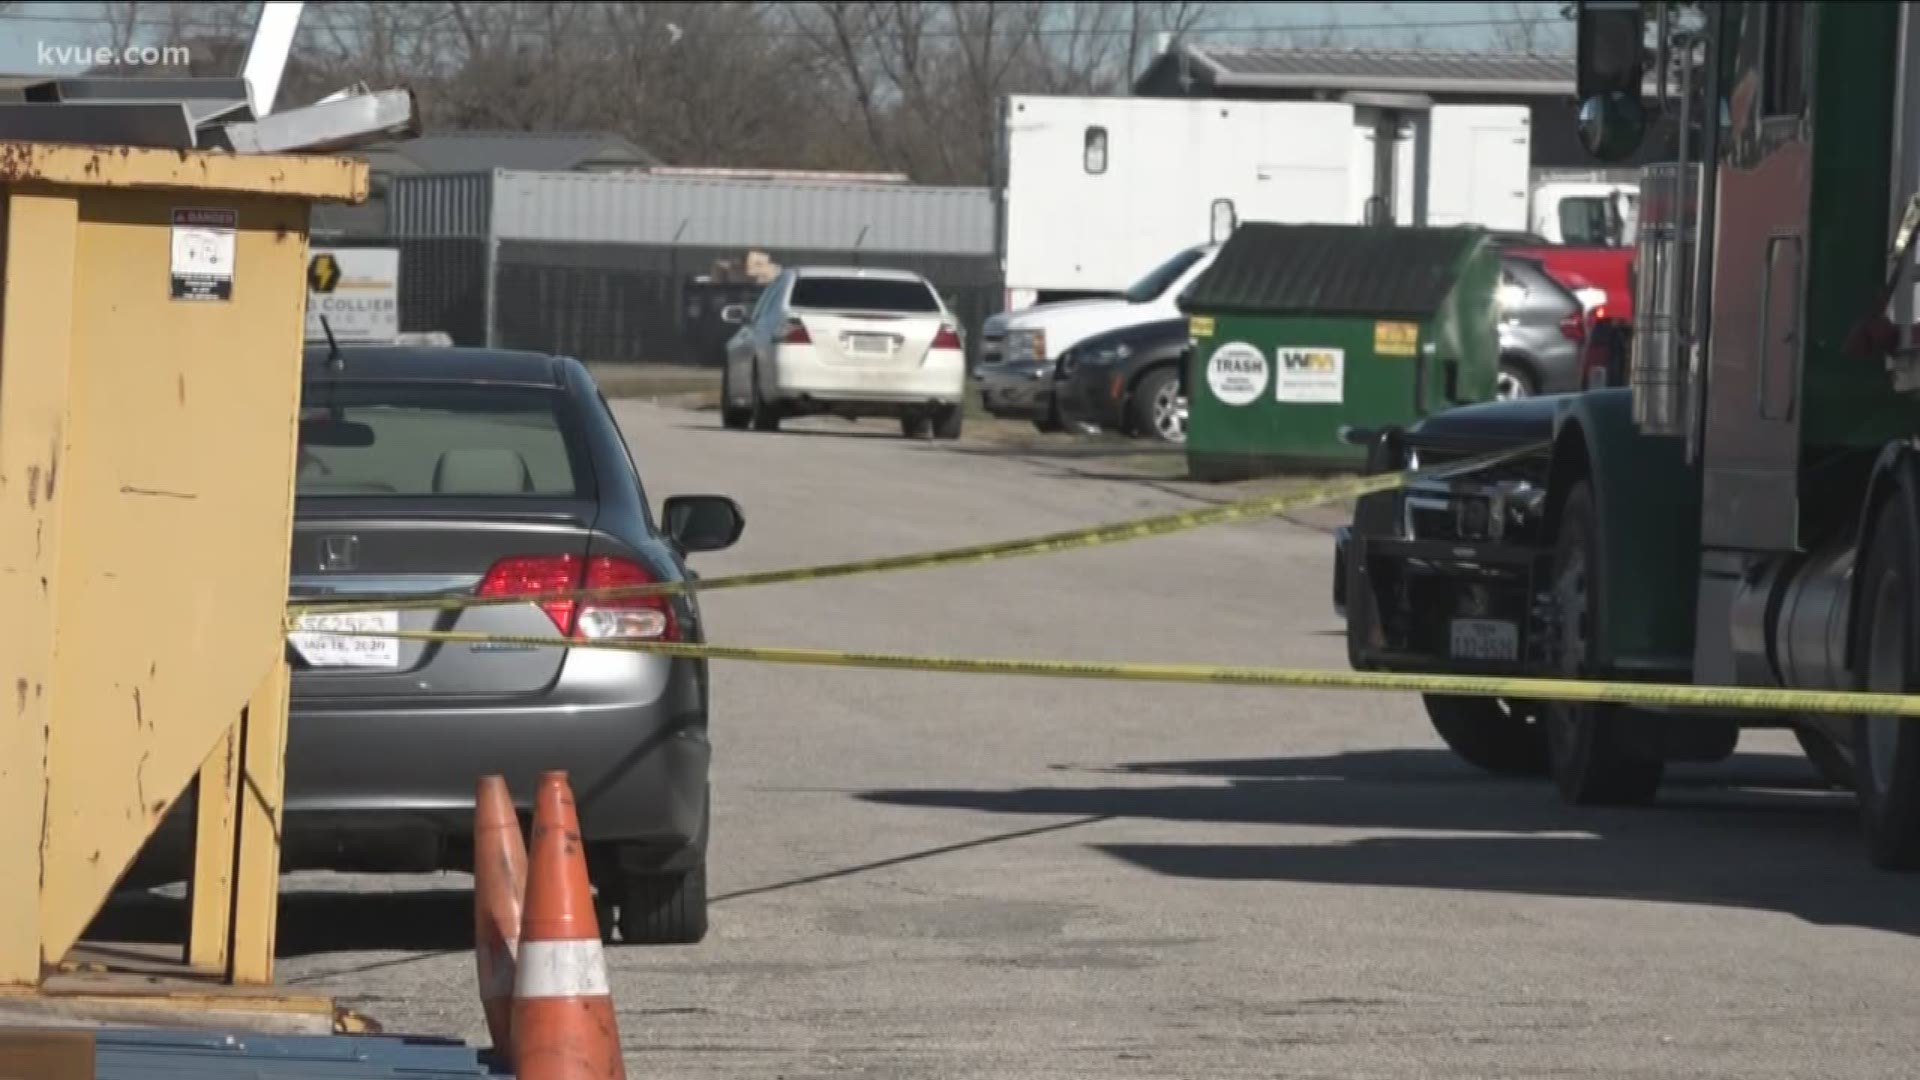 Williamson County deputies found a man's body in an industrial area.